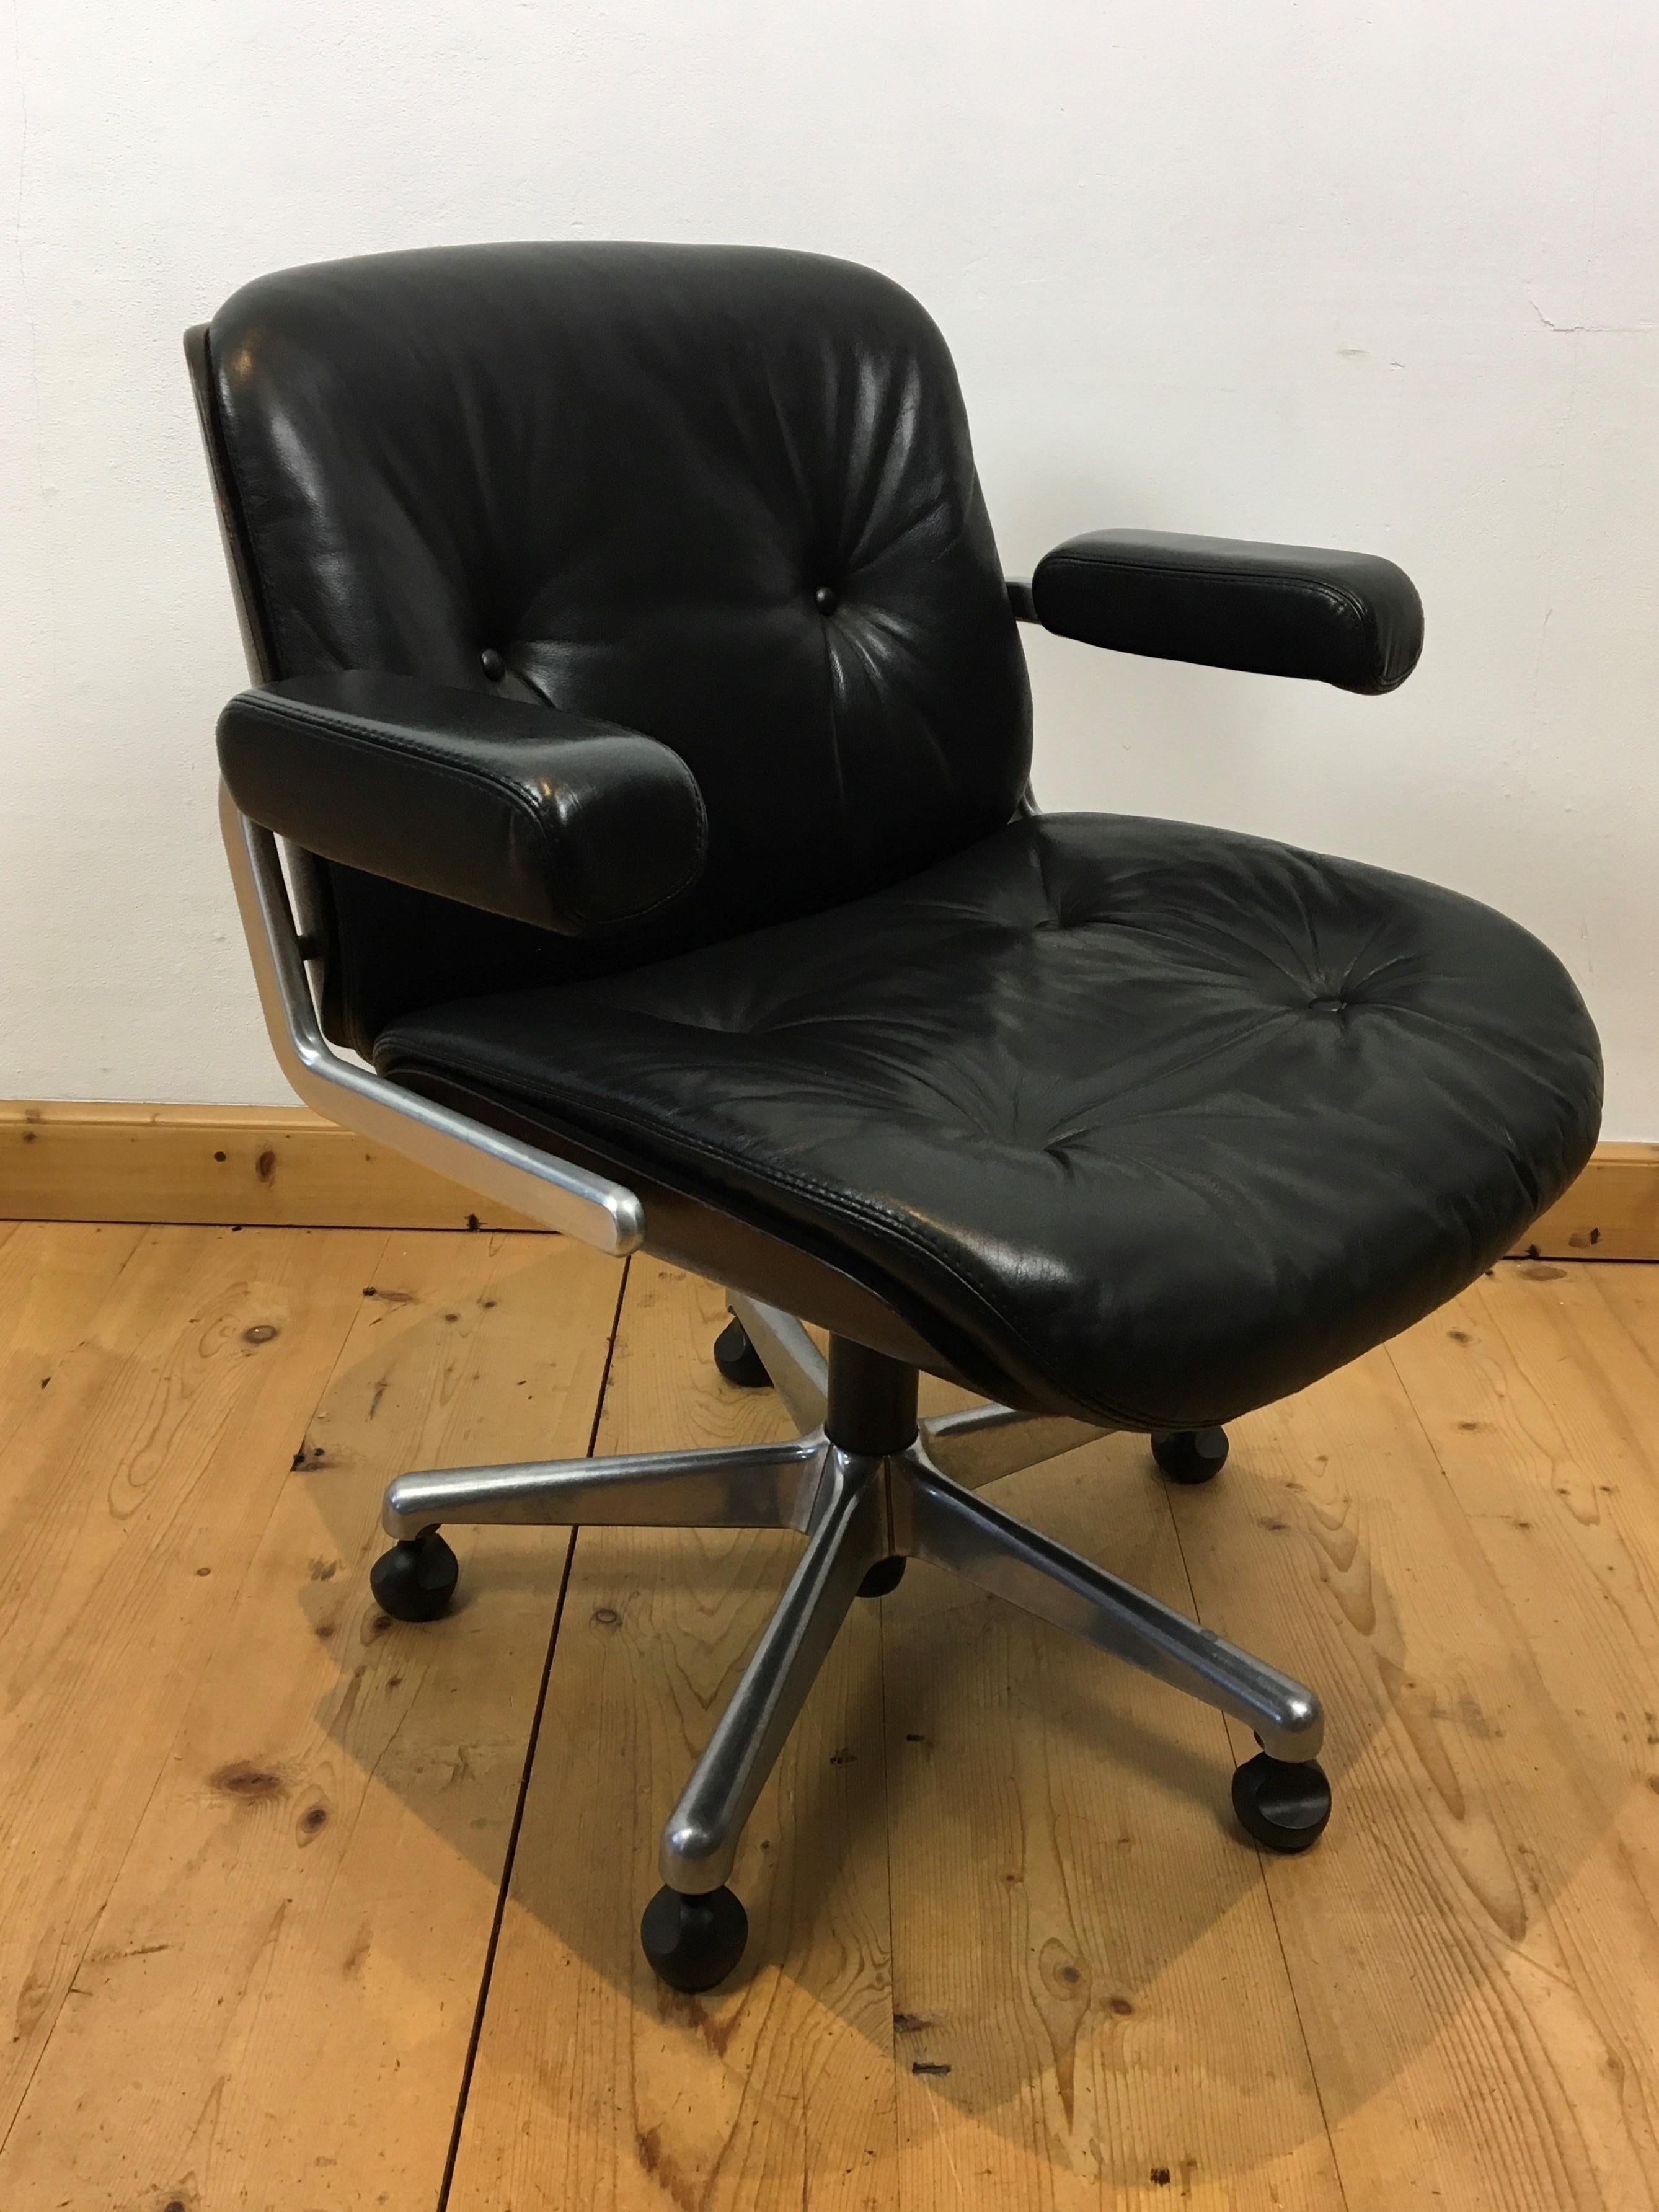 Eames 1 x Office Chair Charles Eames Style.Swivel Action in Cream.3 Available.£45.00 